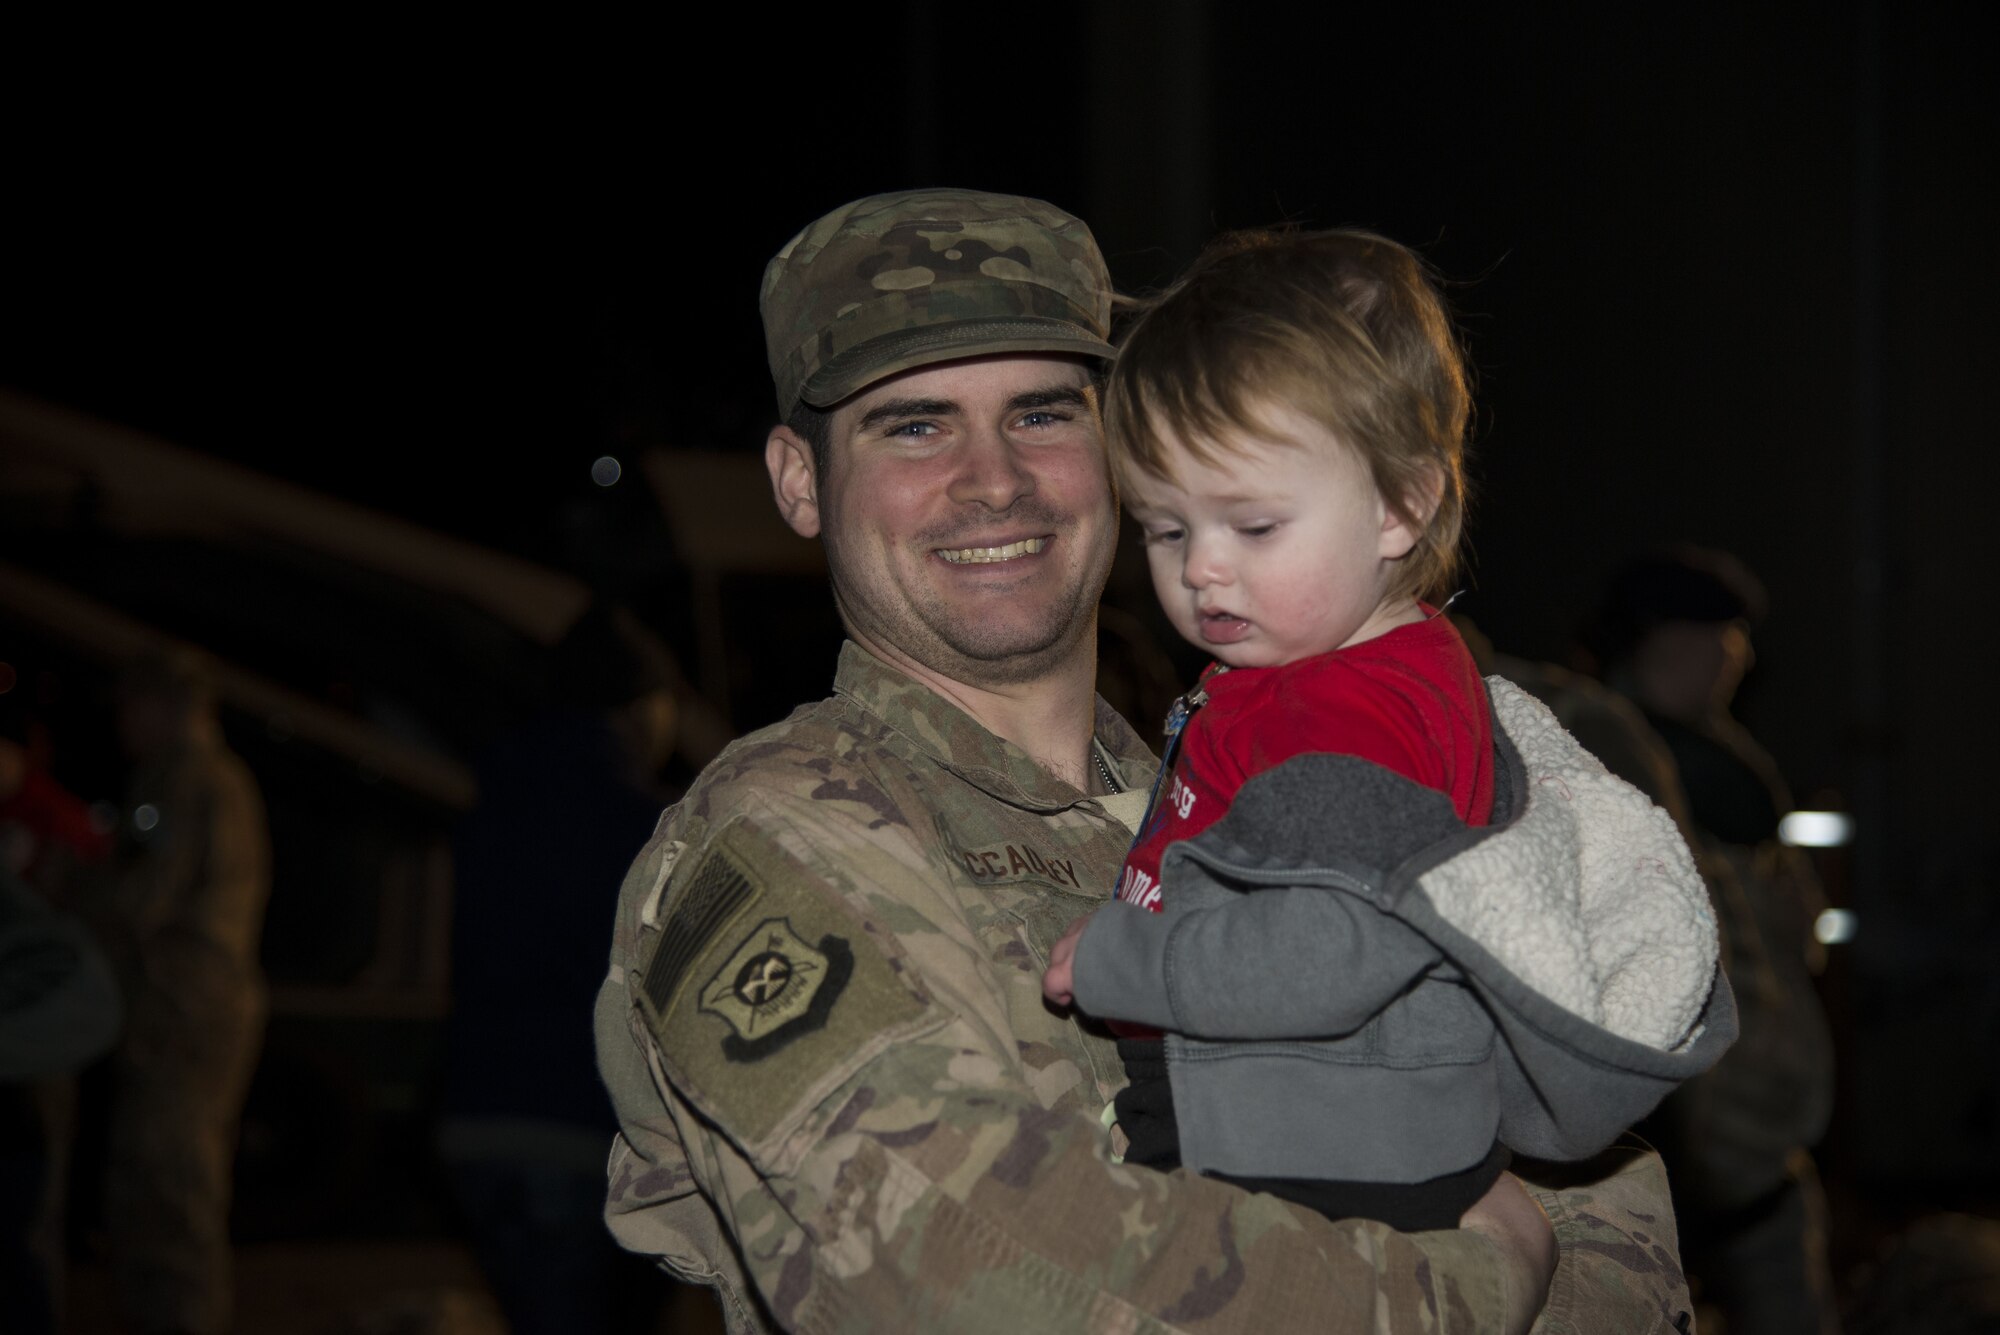 Staff Sgt. Issac McCauley, 436th Security Forces Squadron defender, holds Jaxon, his son, after returning home from deployment Jan. 21, 2018, at Dover Air Force Base, Del. McCauley is one of twelve defenders sent to the Middle East for a six-month deployment. (U.S. Air Force Photo by Staff Sgt. Aaron J. Jenne)